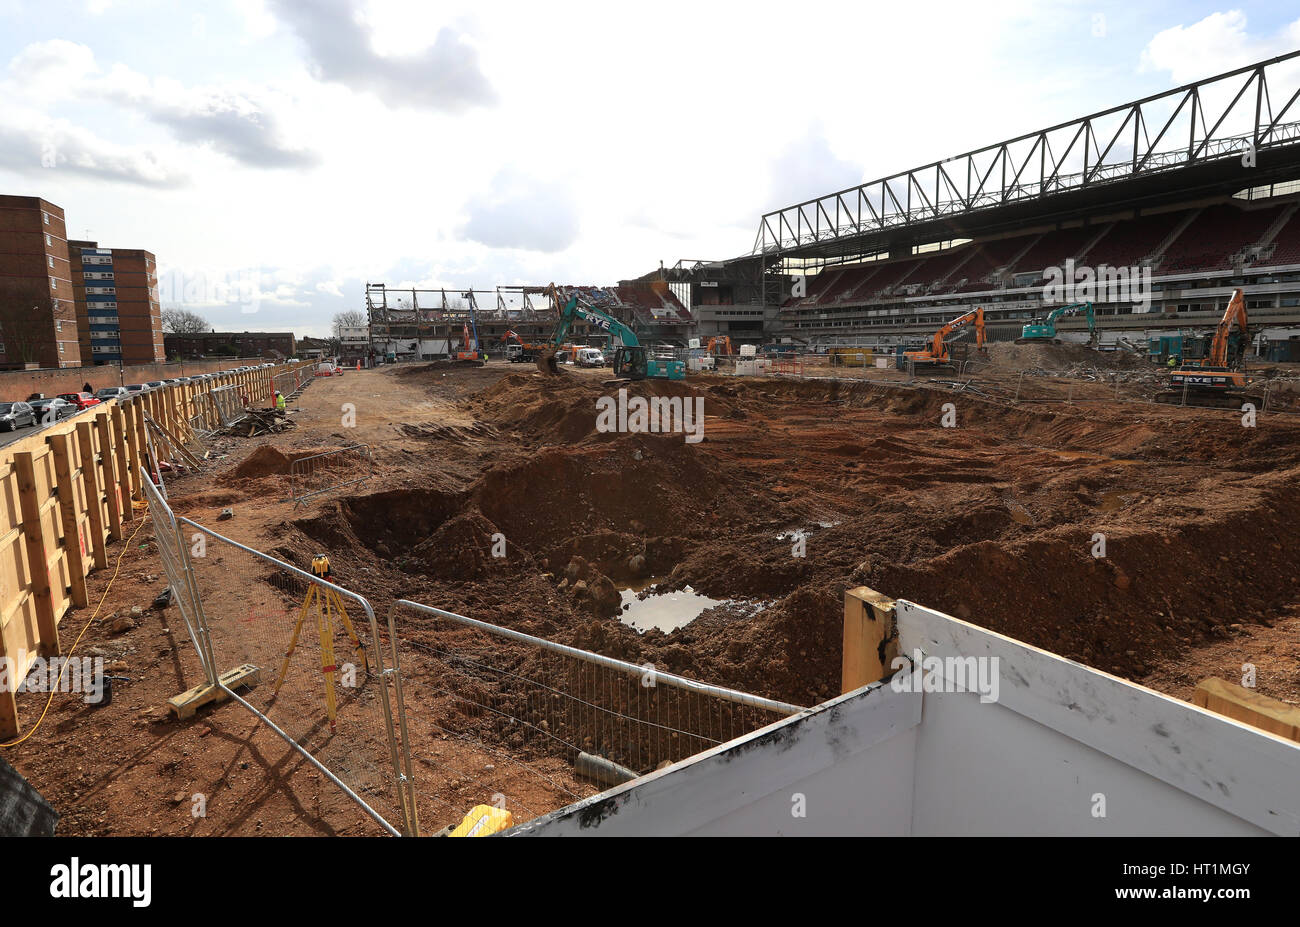 Demolition continues at the Boleyn Ground as West Ham's old stadium is redeveloped in to a residential estate. Stock Photo